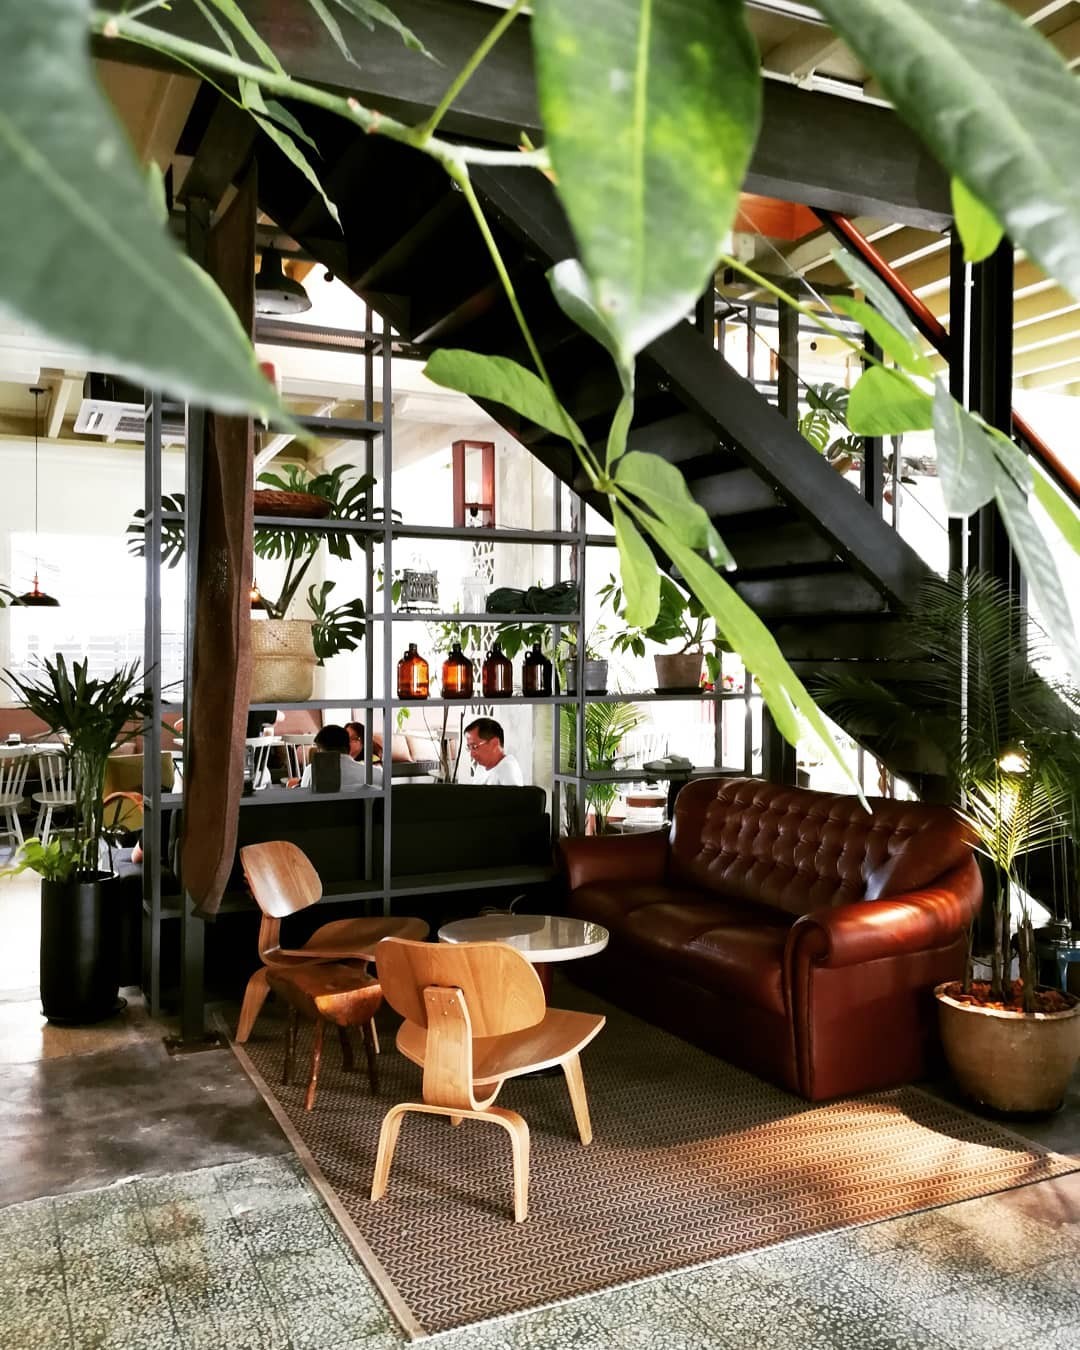 Kafka is one the hottest new cafes to open in Penang, Malaysia, this year. Photo: eddiefoo92/Instagram